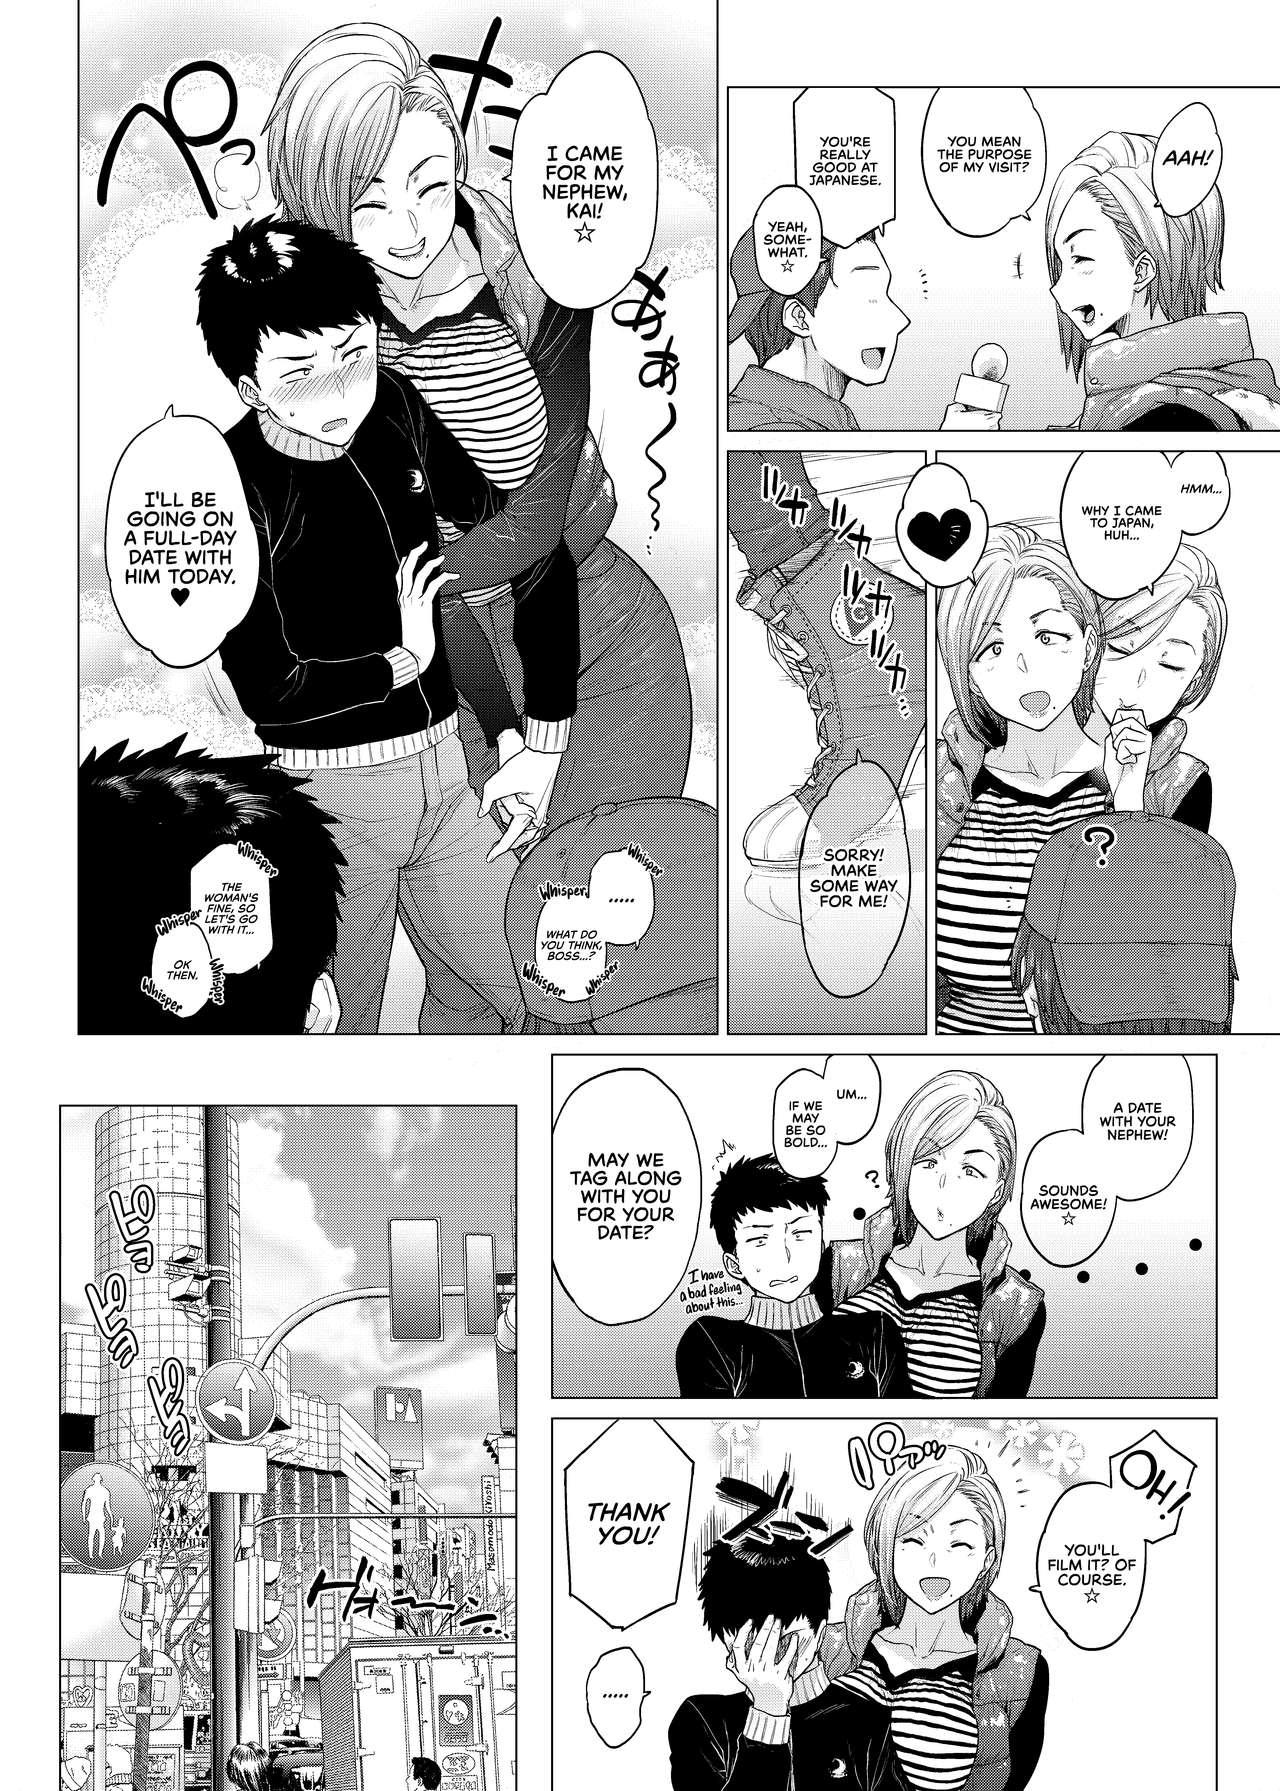 Topless Why did you オーバー the sea? | Why did you cross over the sea? - Original Great Fuck - Page 5